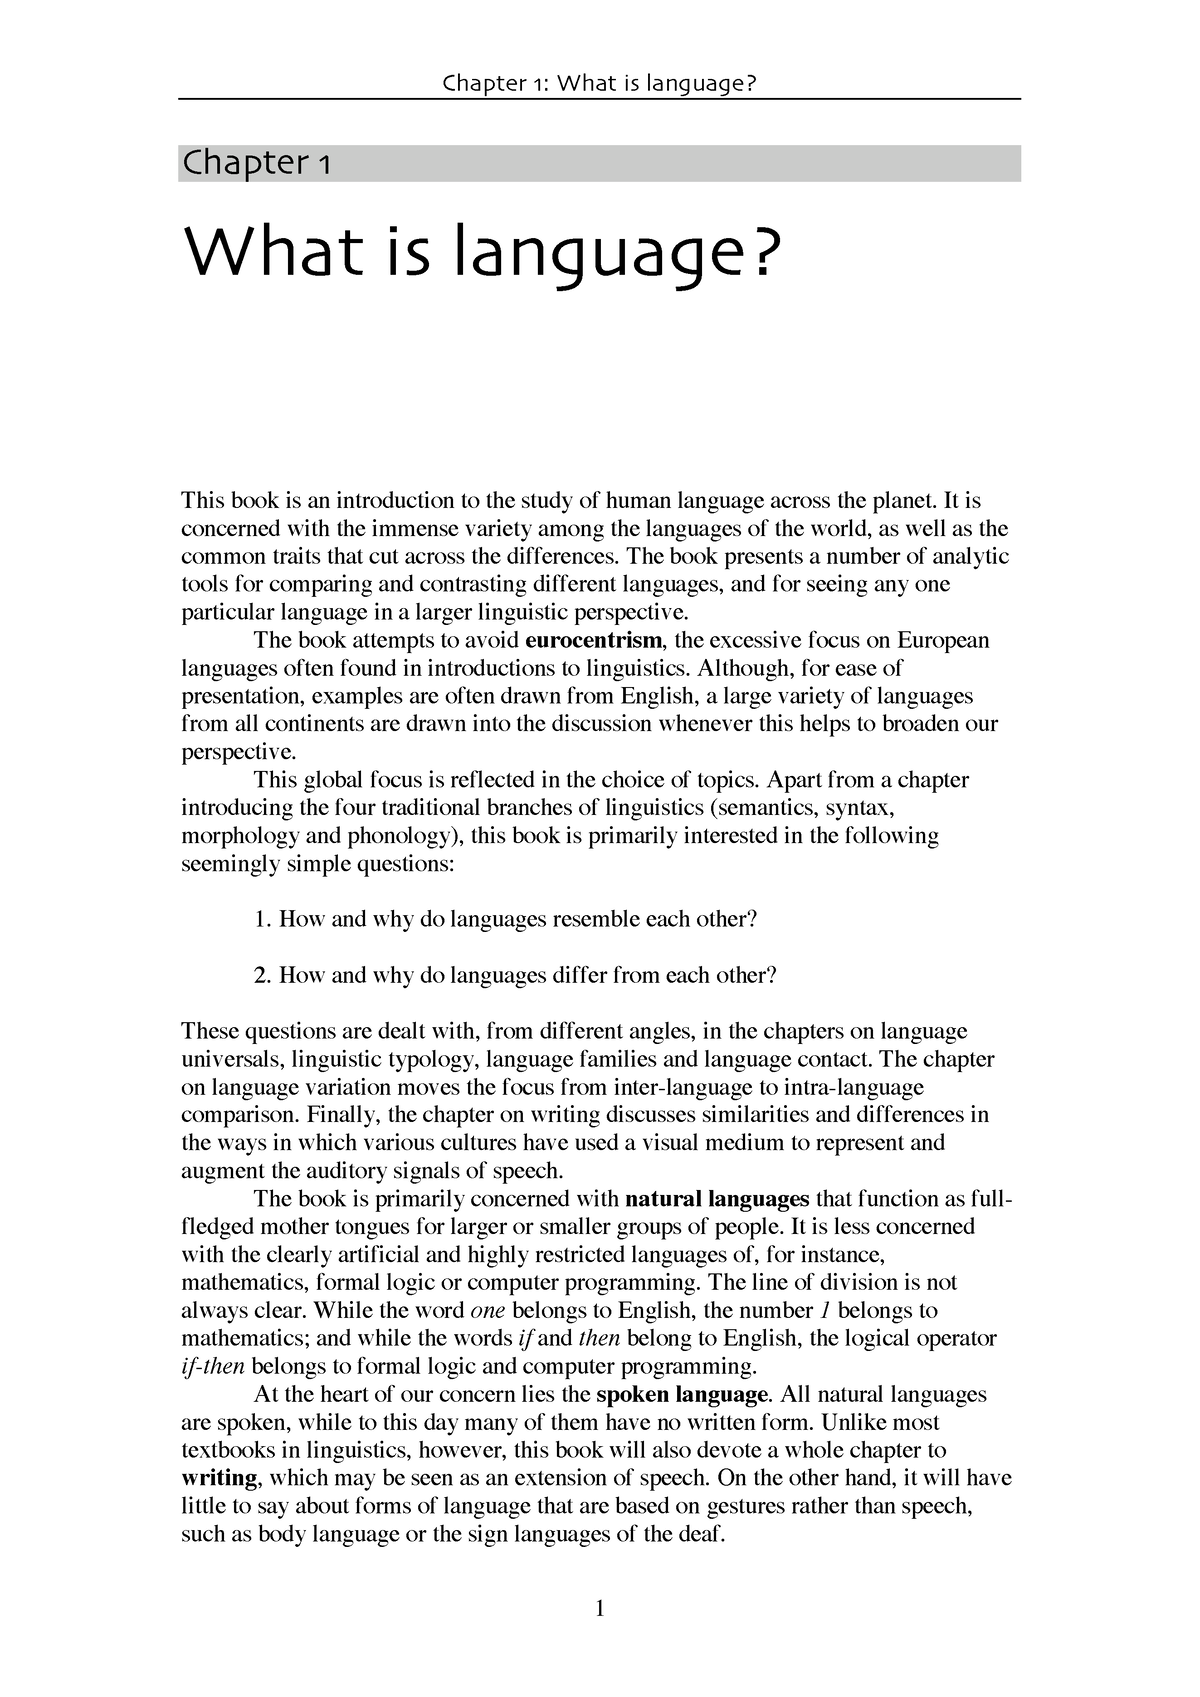 chapter-1-languages-and-importance-chapter-1-what-is-language-this